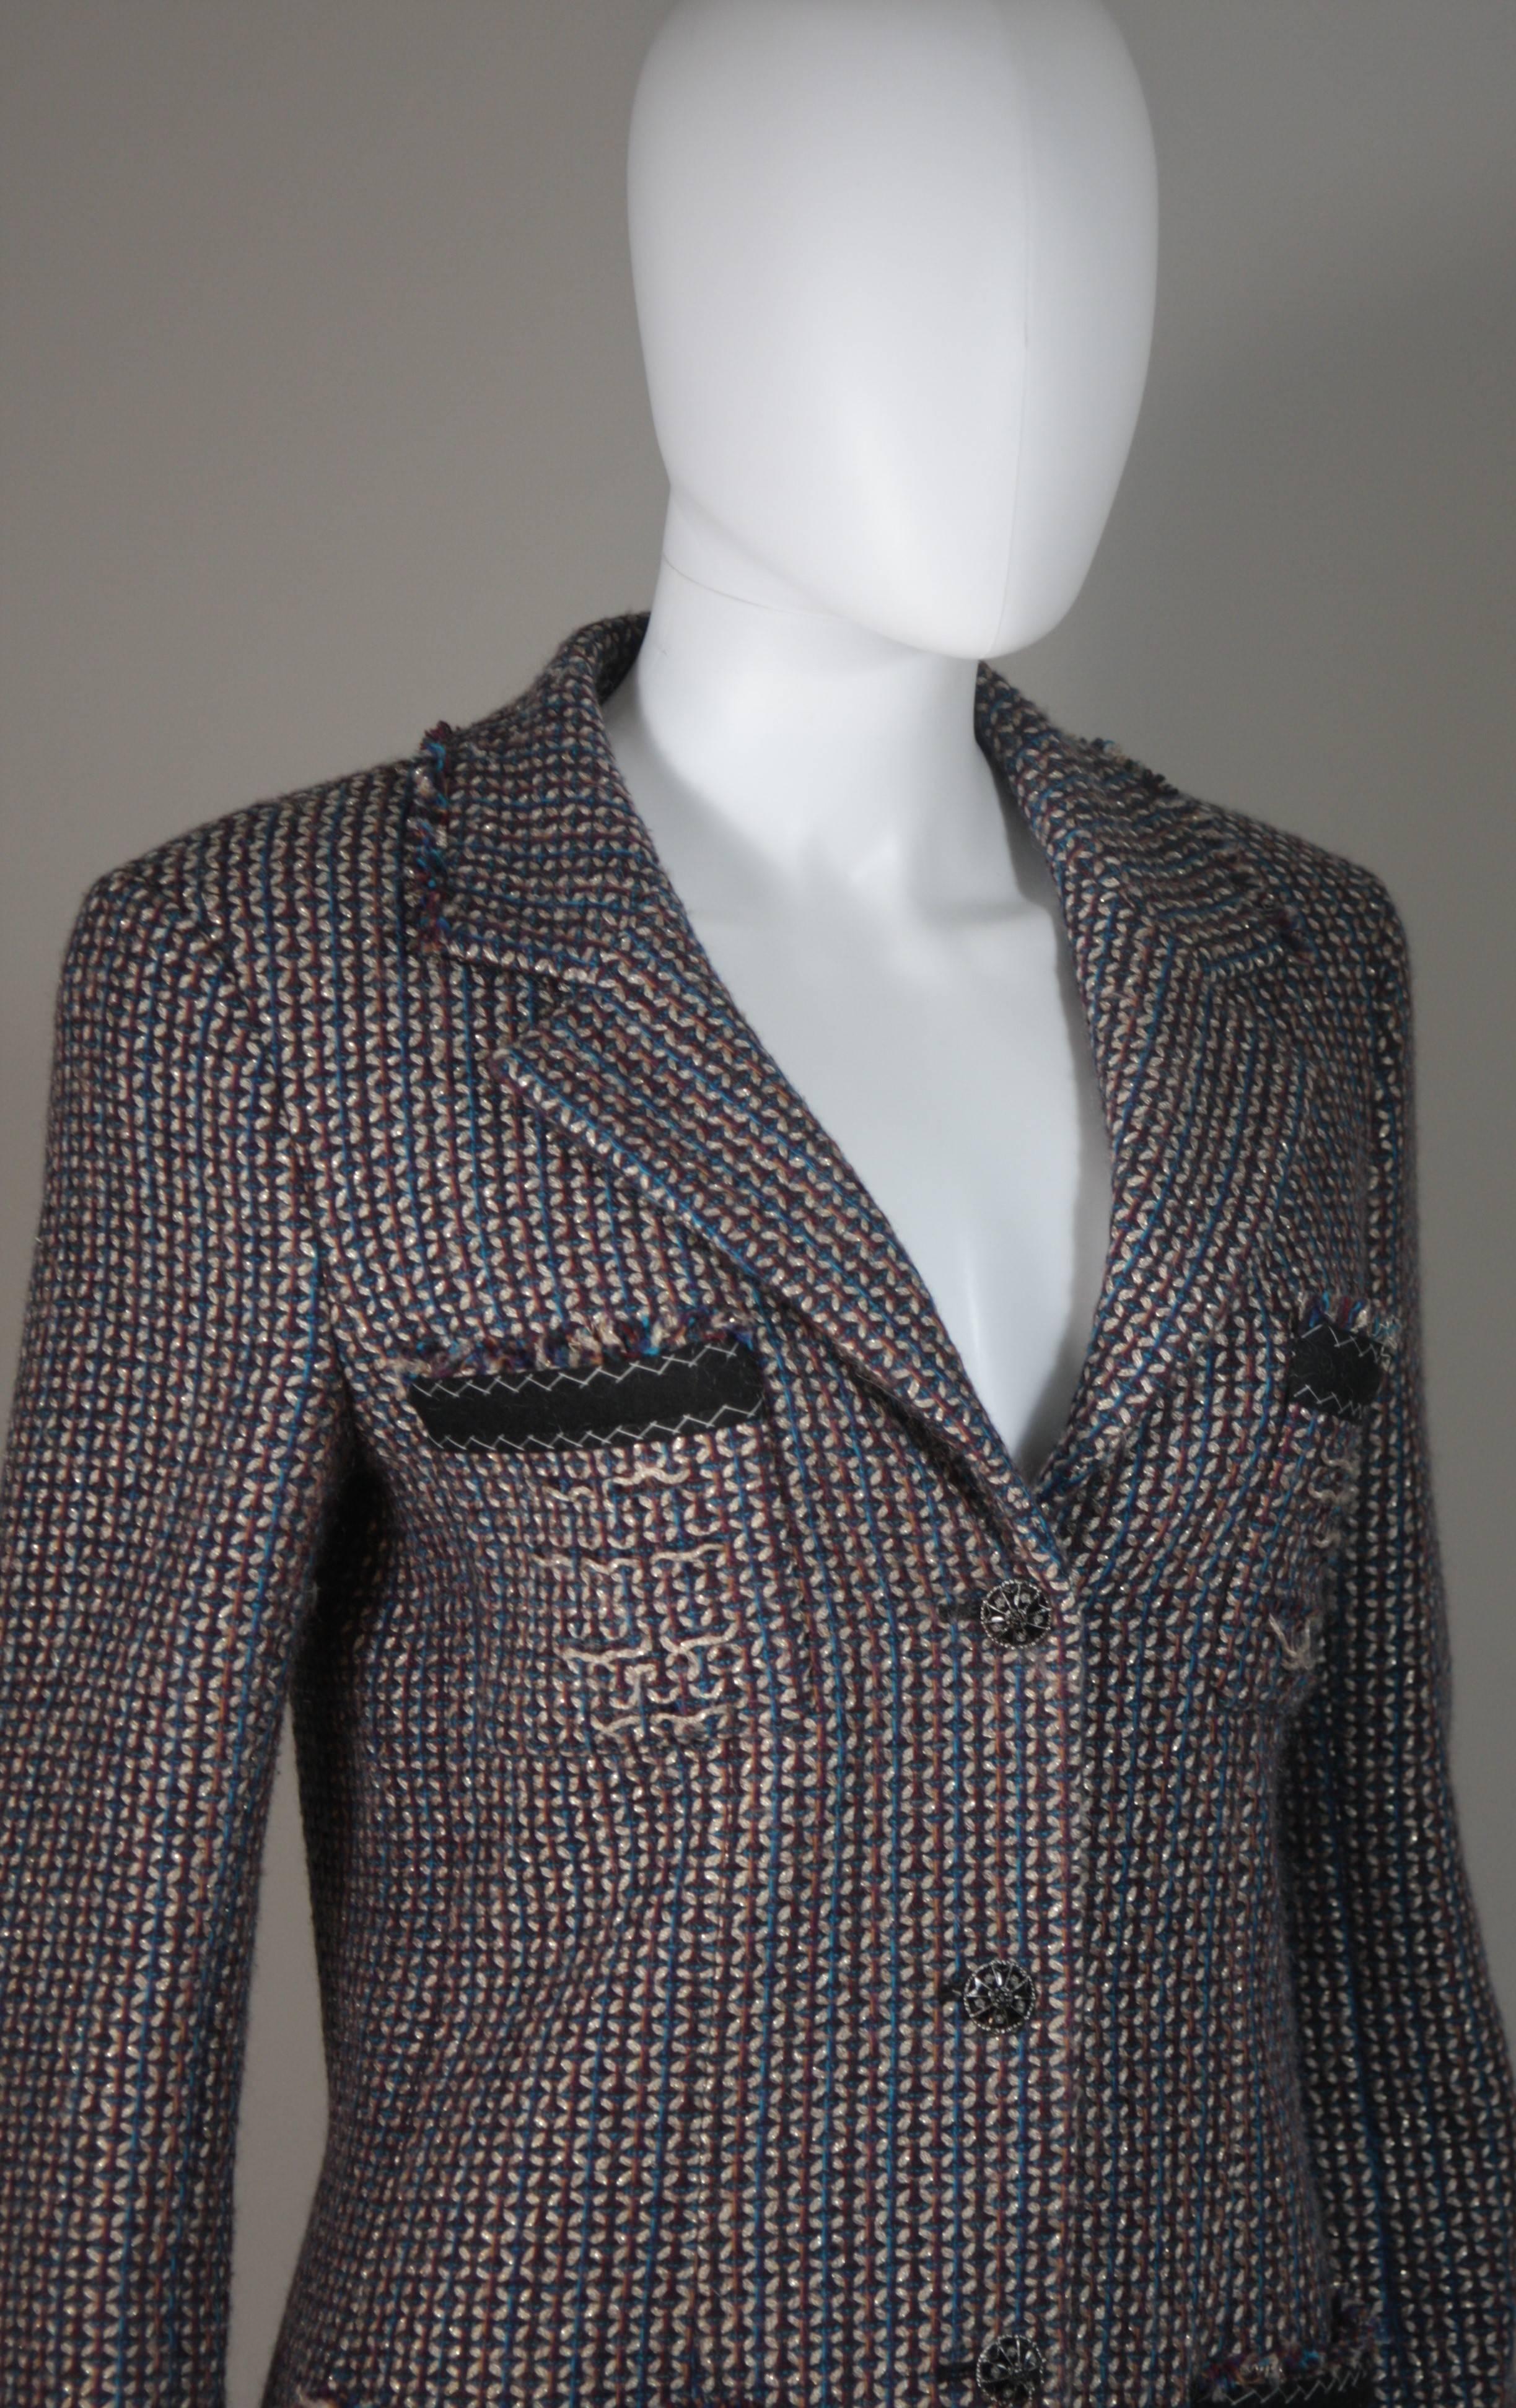 Women's CHANEL Gold Metallic Tweed with Brown and Burgundy Skirt Suit Size 40